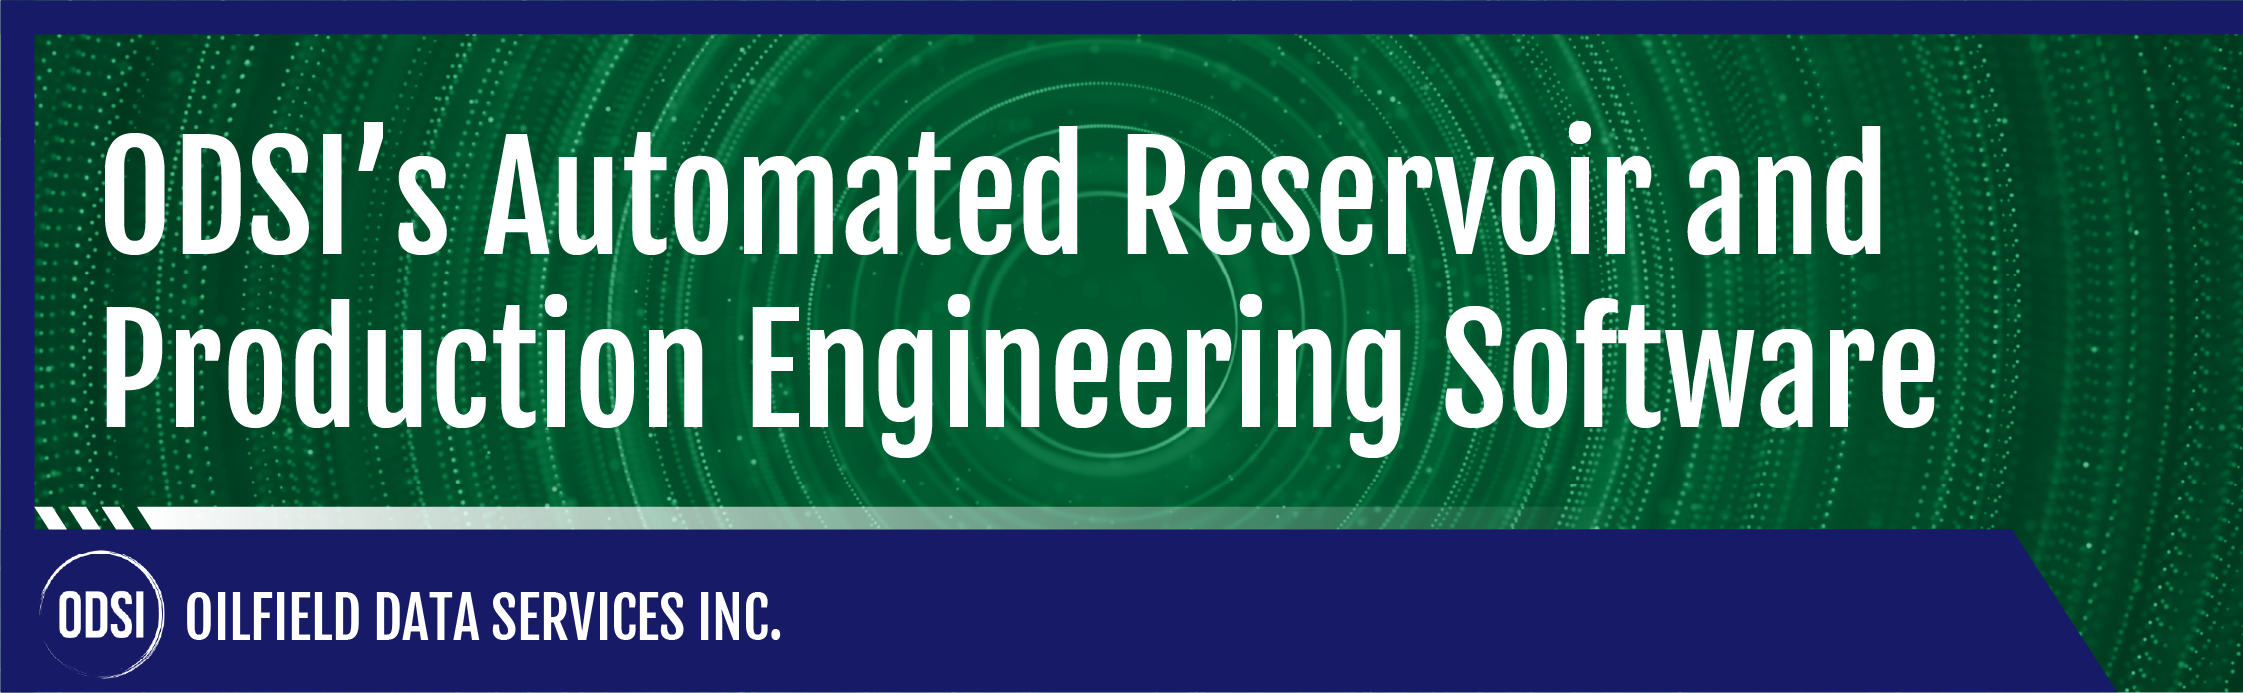 ODSI's Automated Reservoir and Production Engineering Software